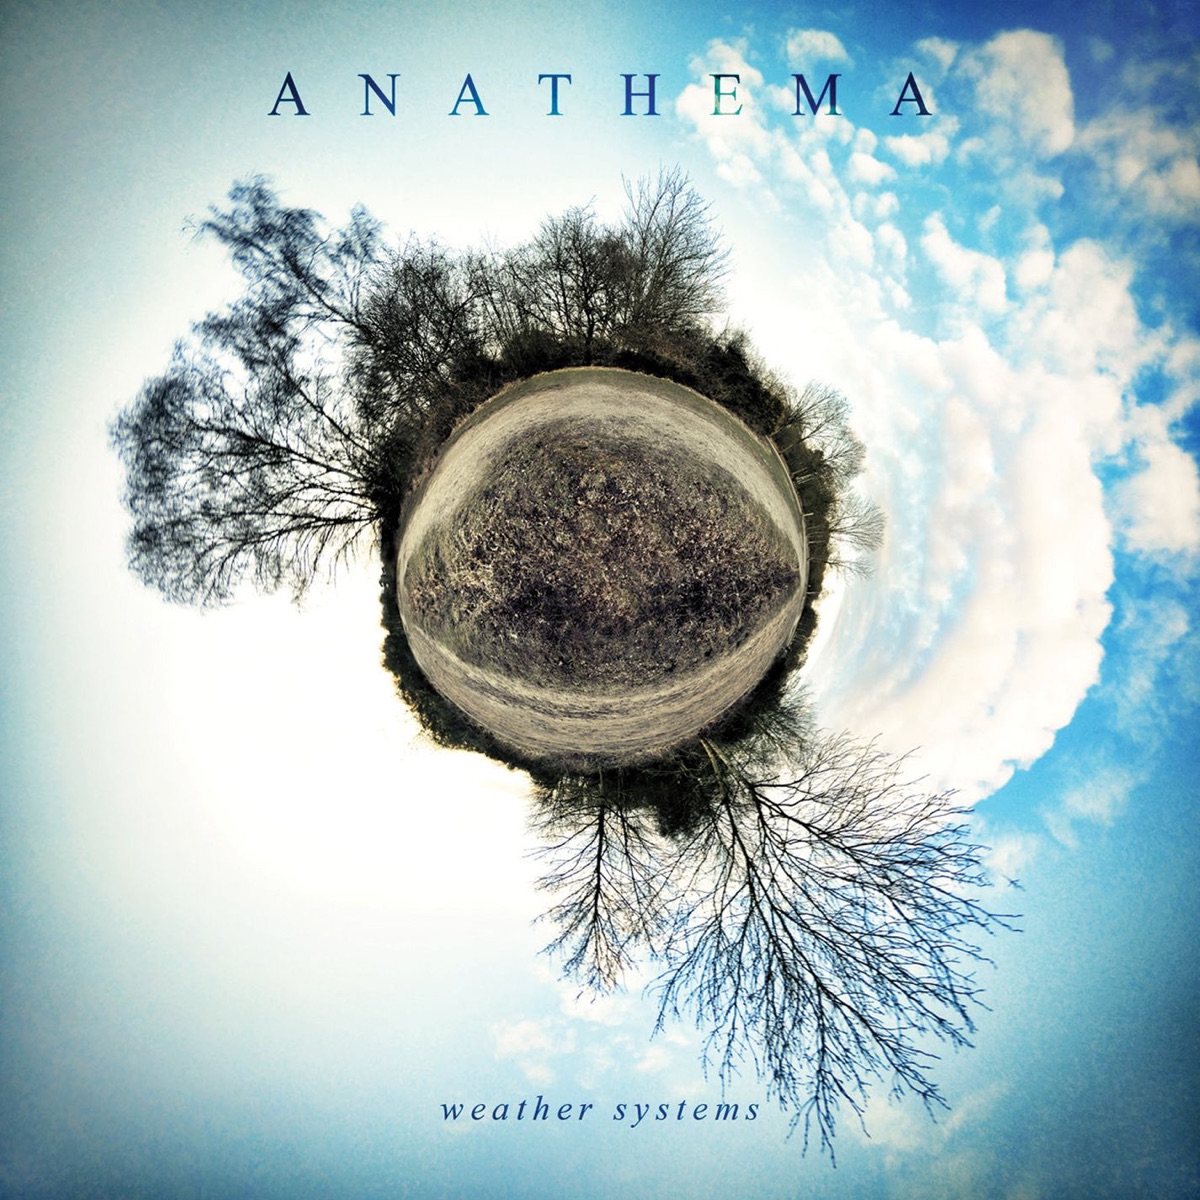 A Fine Day to Exit (Remastered) by Anathema on Apple Music